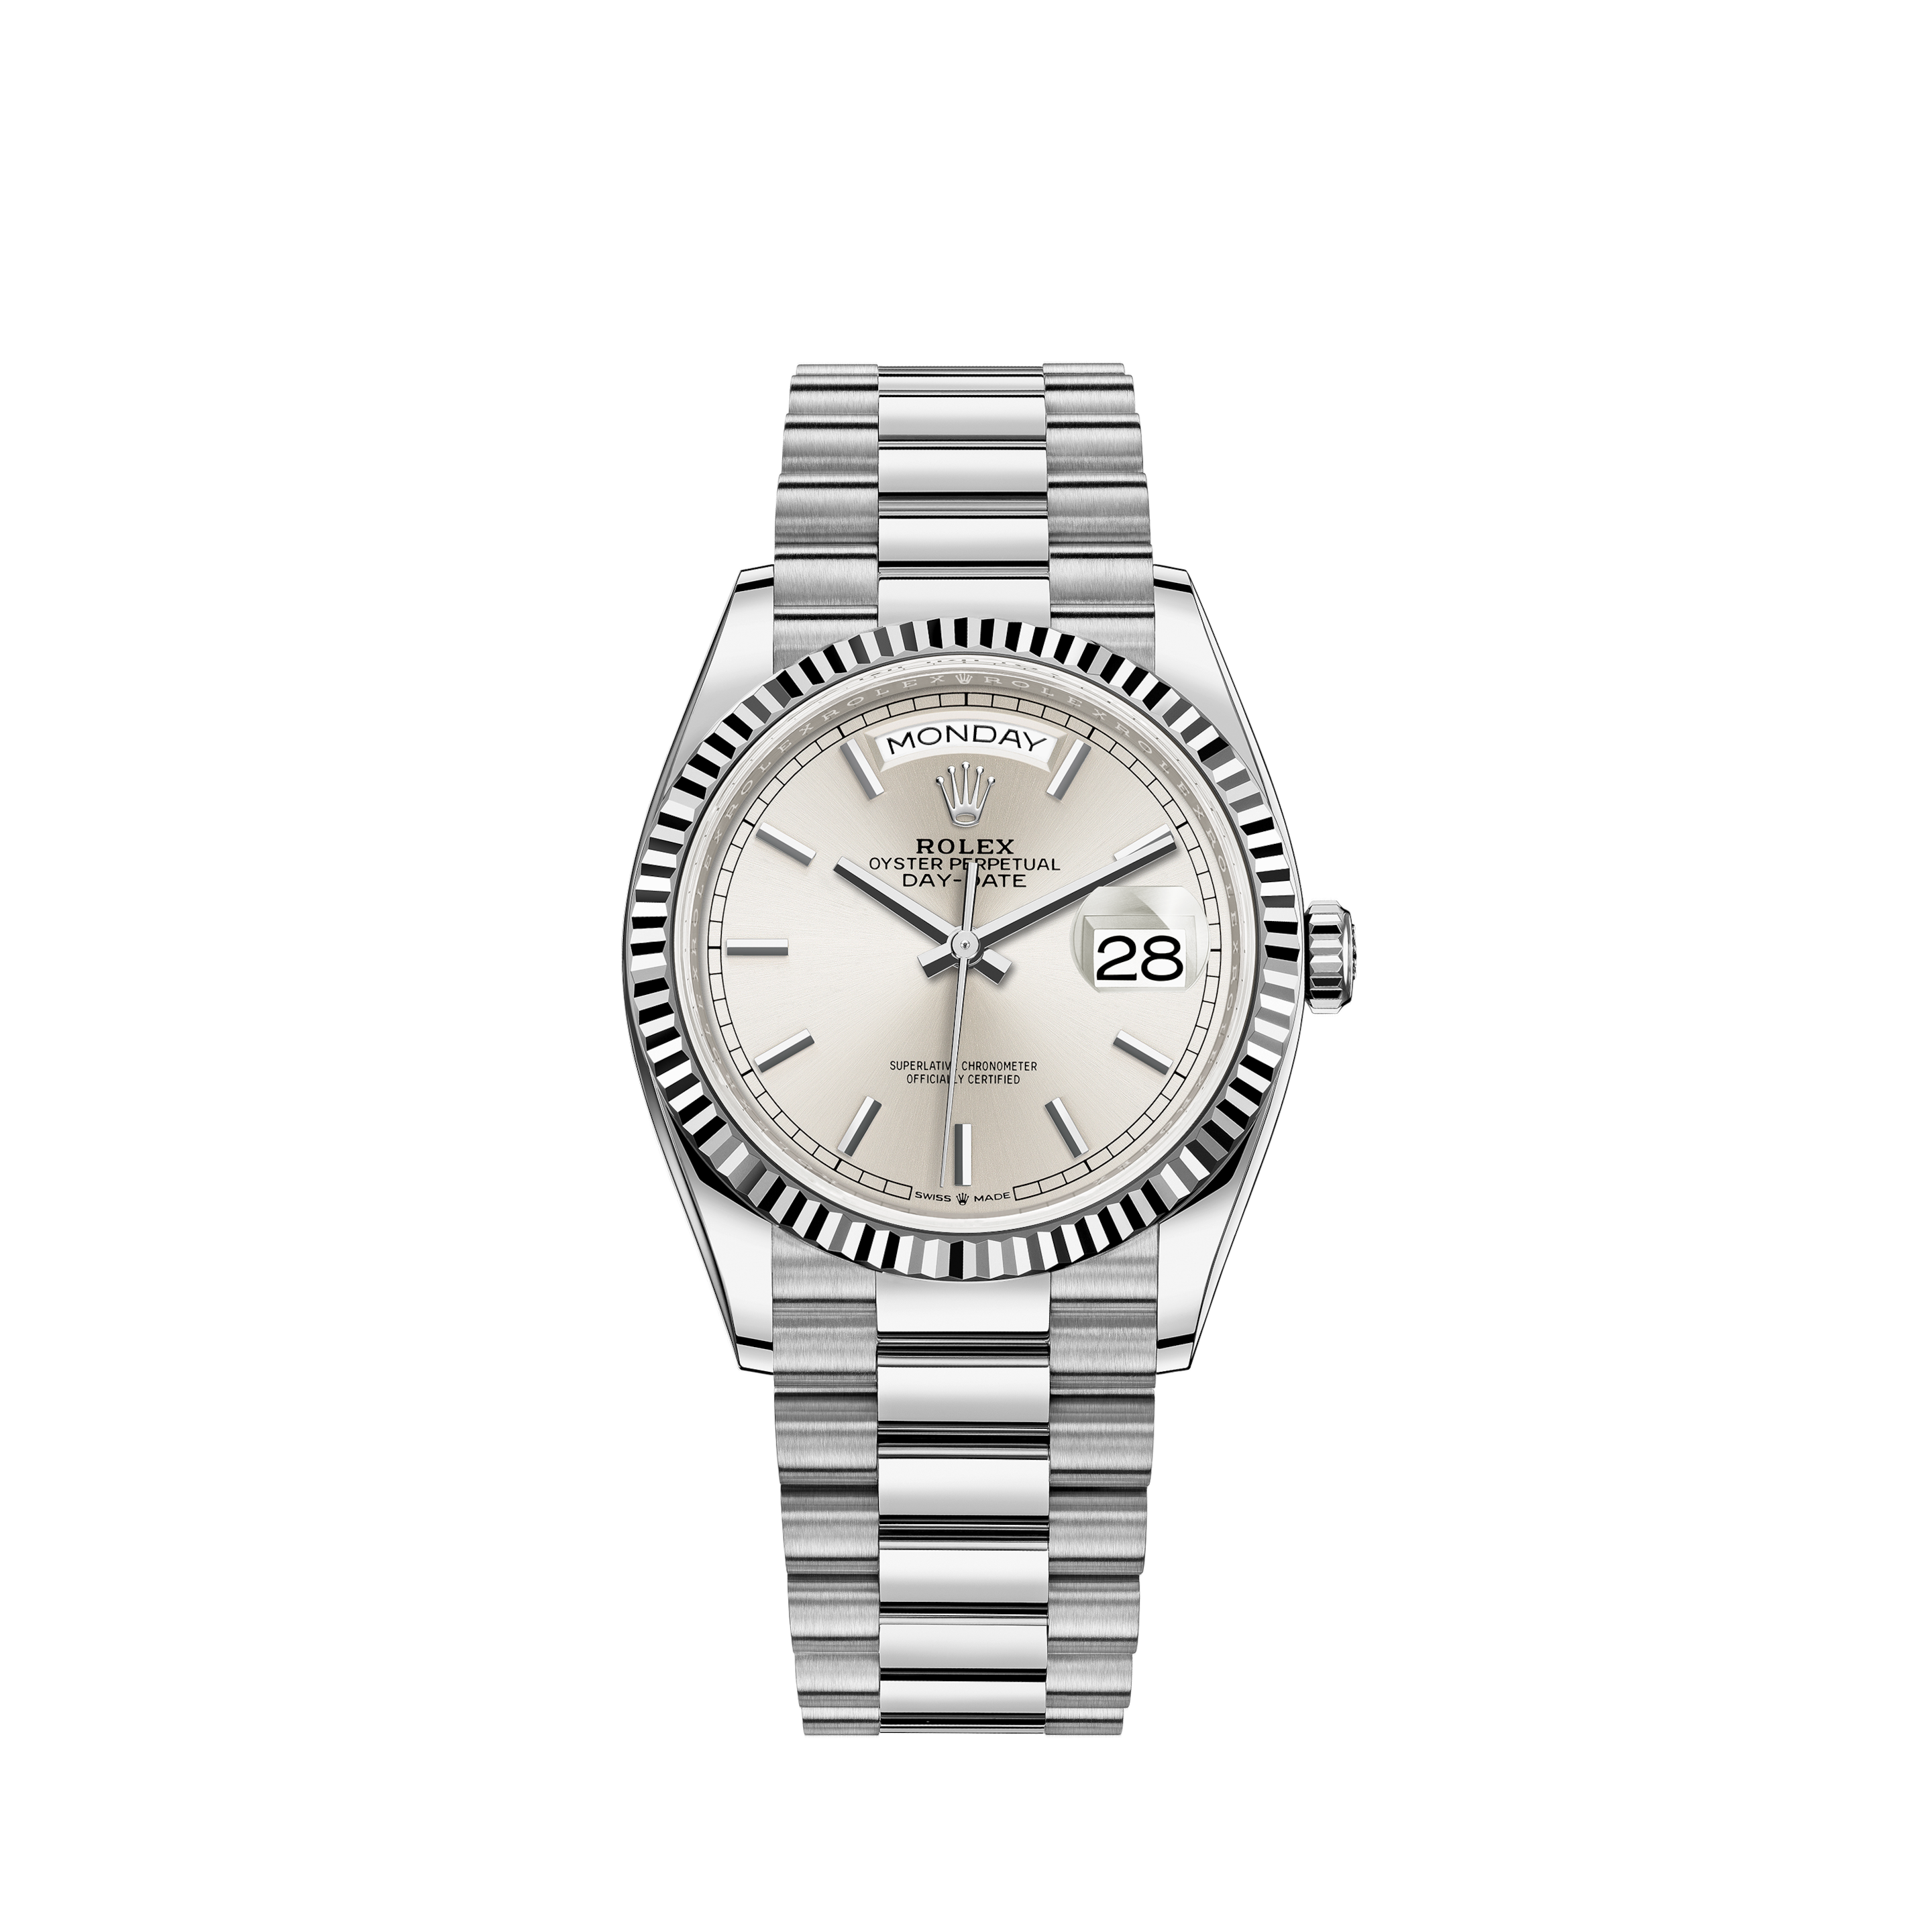 rolex oyster perpetual day date superlative chronometer officially certified